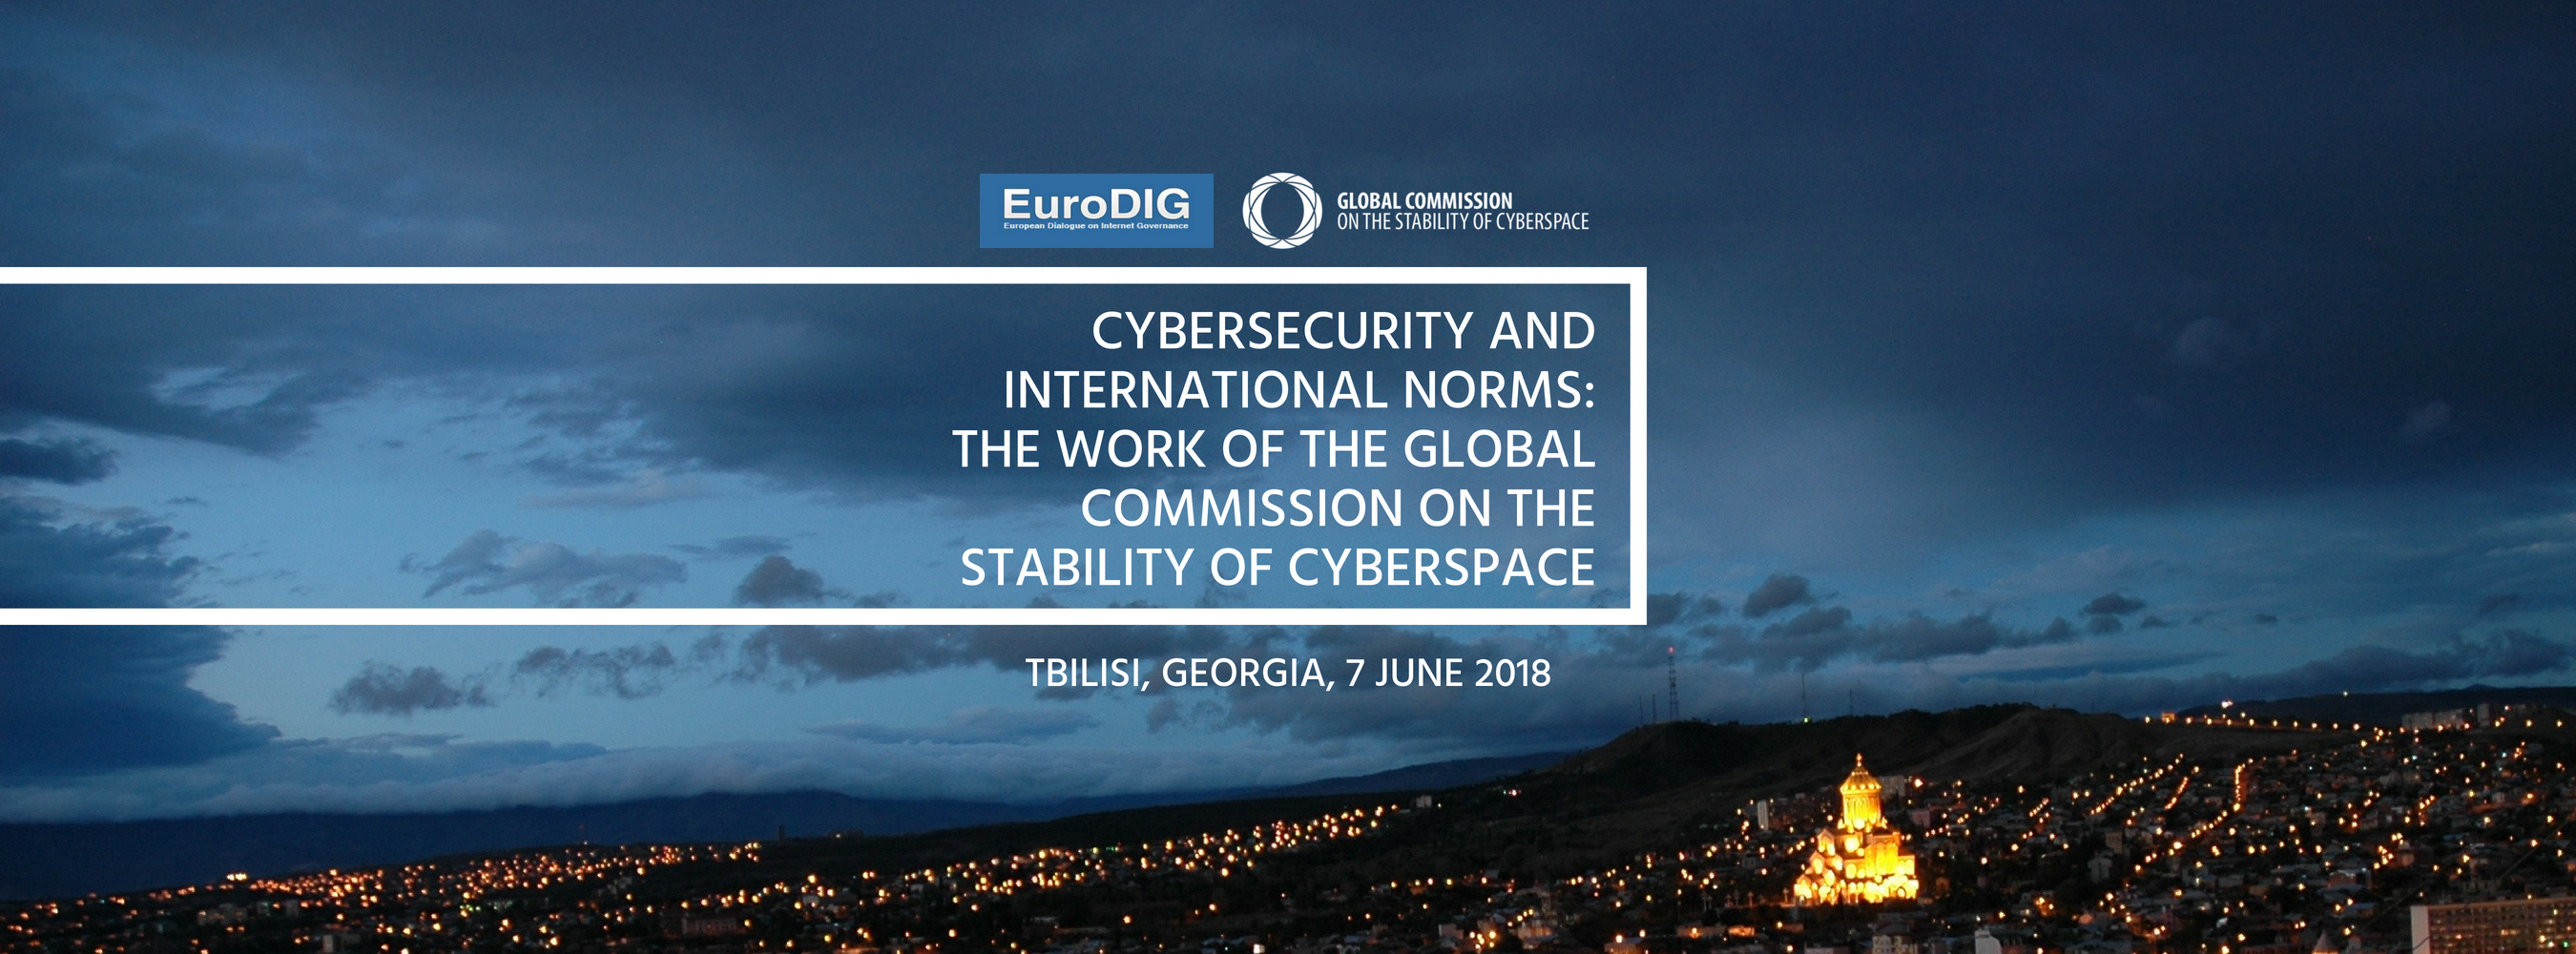 Global Commission on the Stability of Cyberspace at EURODIG 2018